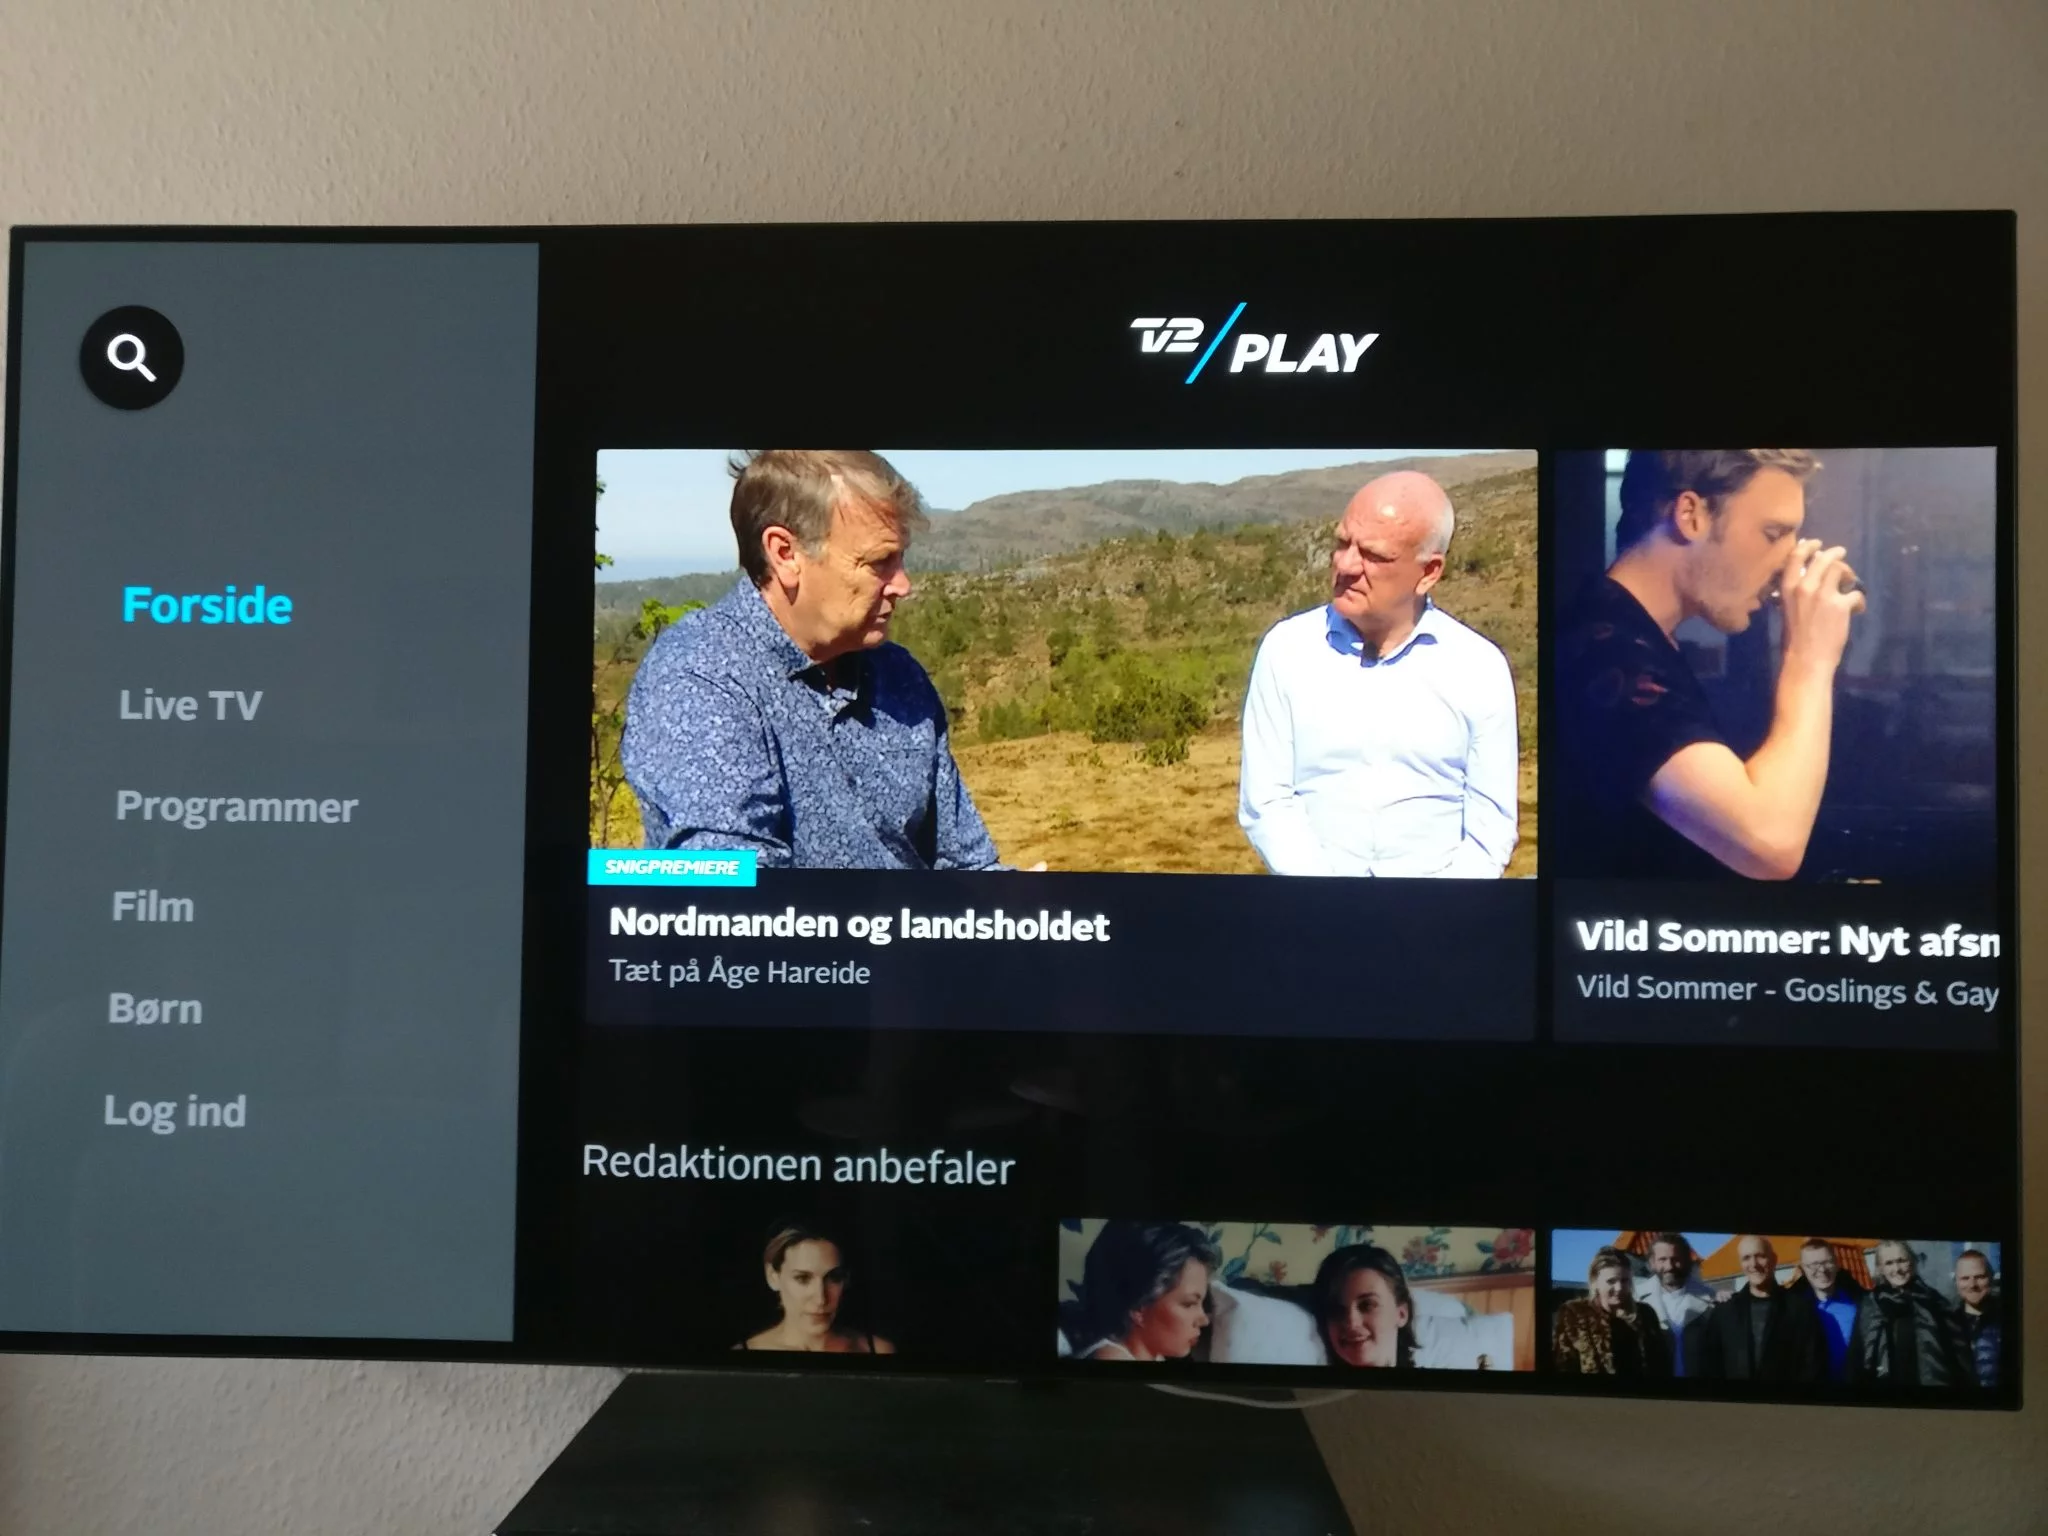 TV 2 Play Android TV